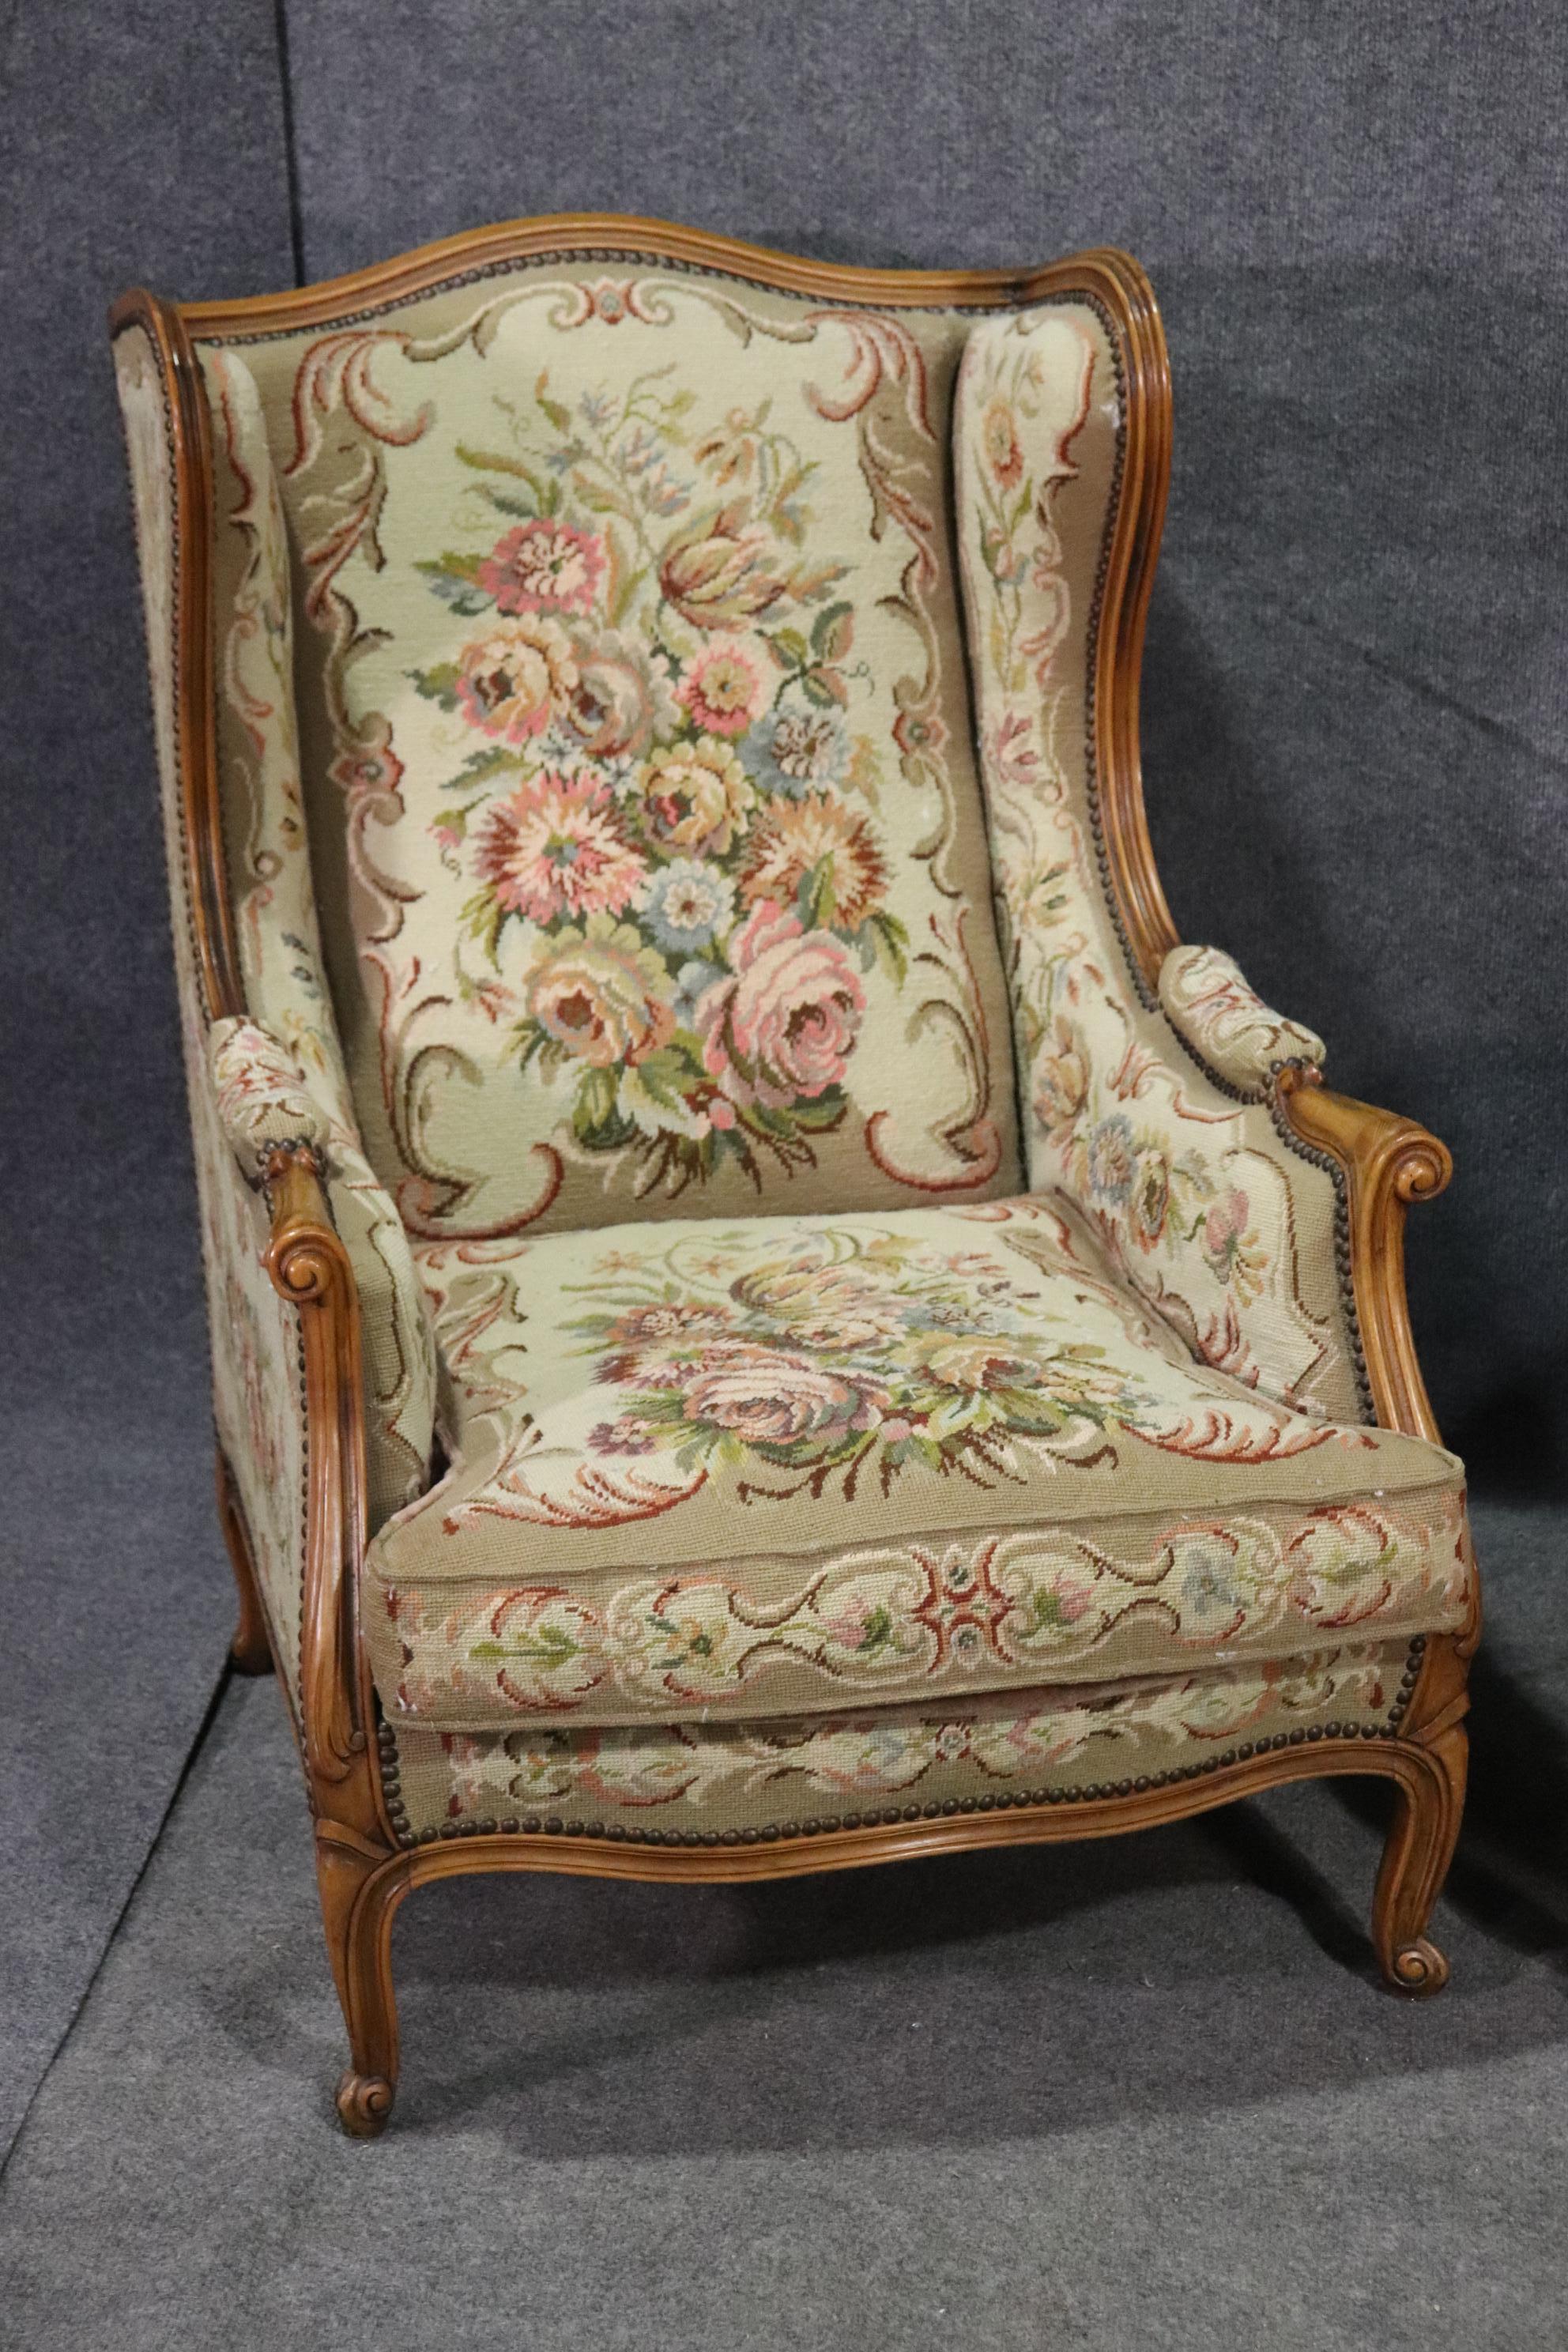 These are beautiful French wingchairs or bergère chairs. The chairs feature tapestry upholstery and walnut frames. The chairs are in good condition for their age. They date to the 1950s era and measure 38 tall x 28 wide x 36 deep and seat height is